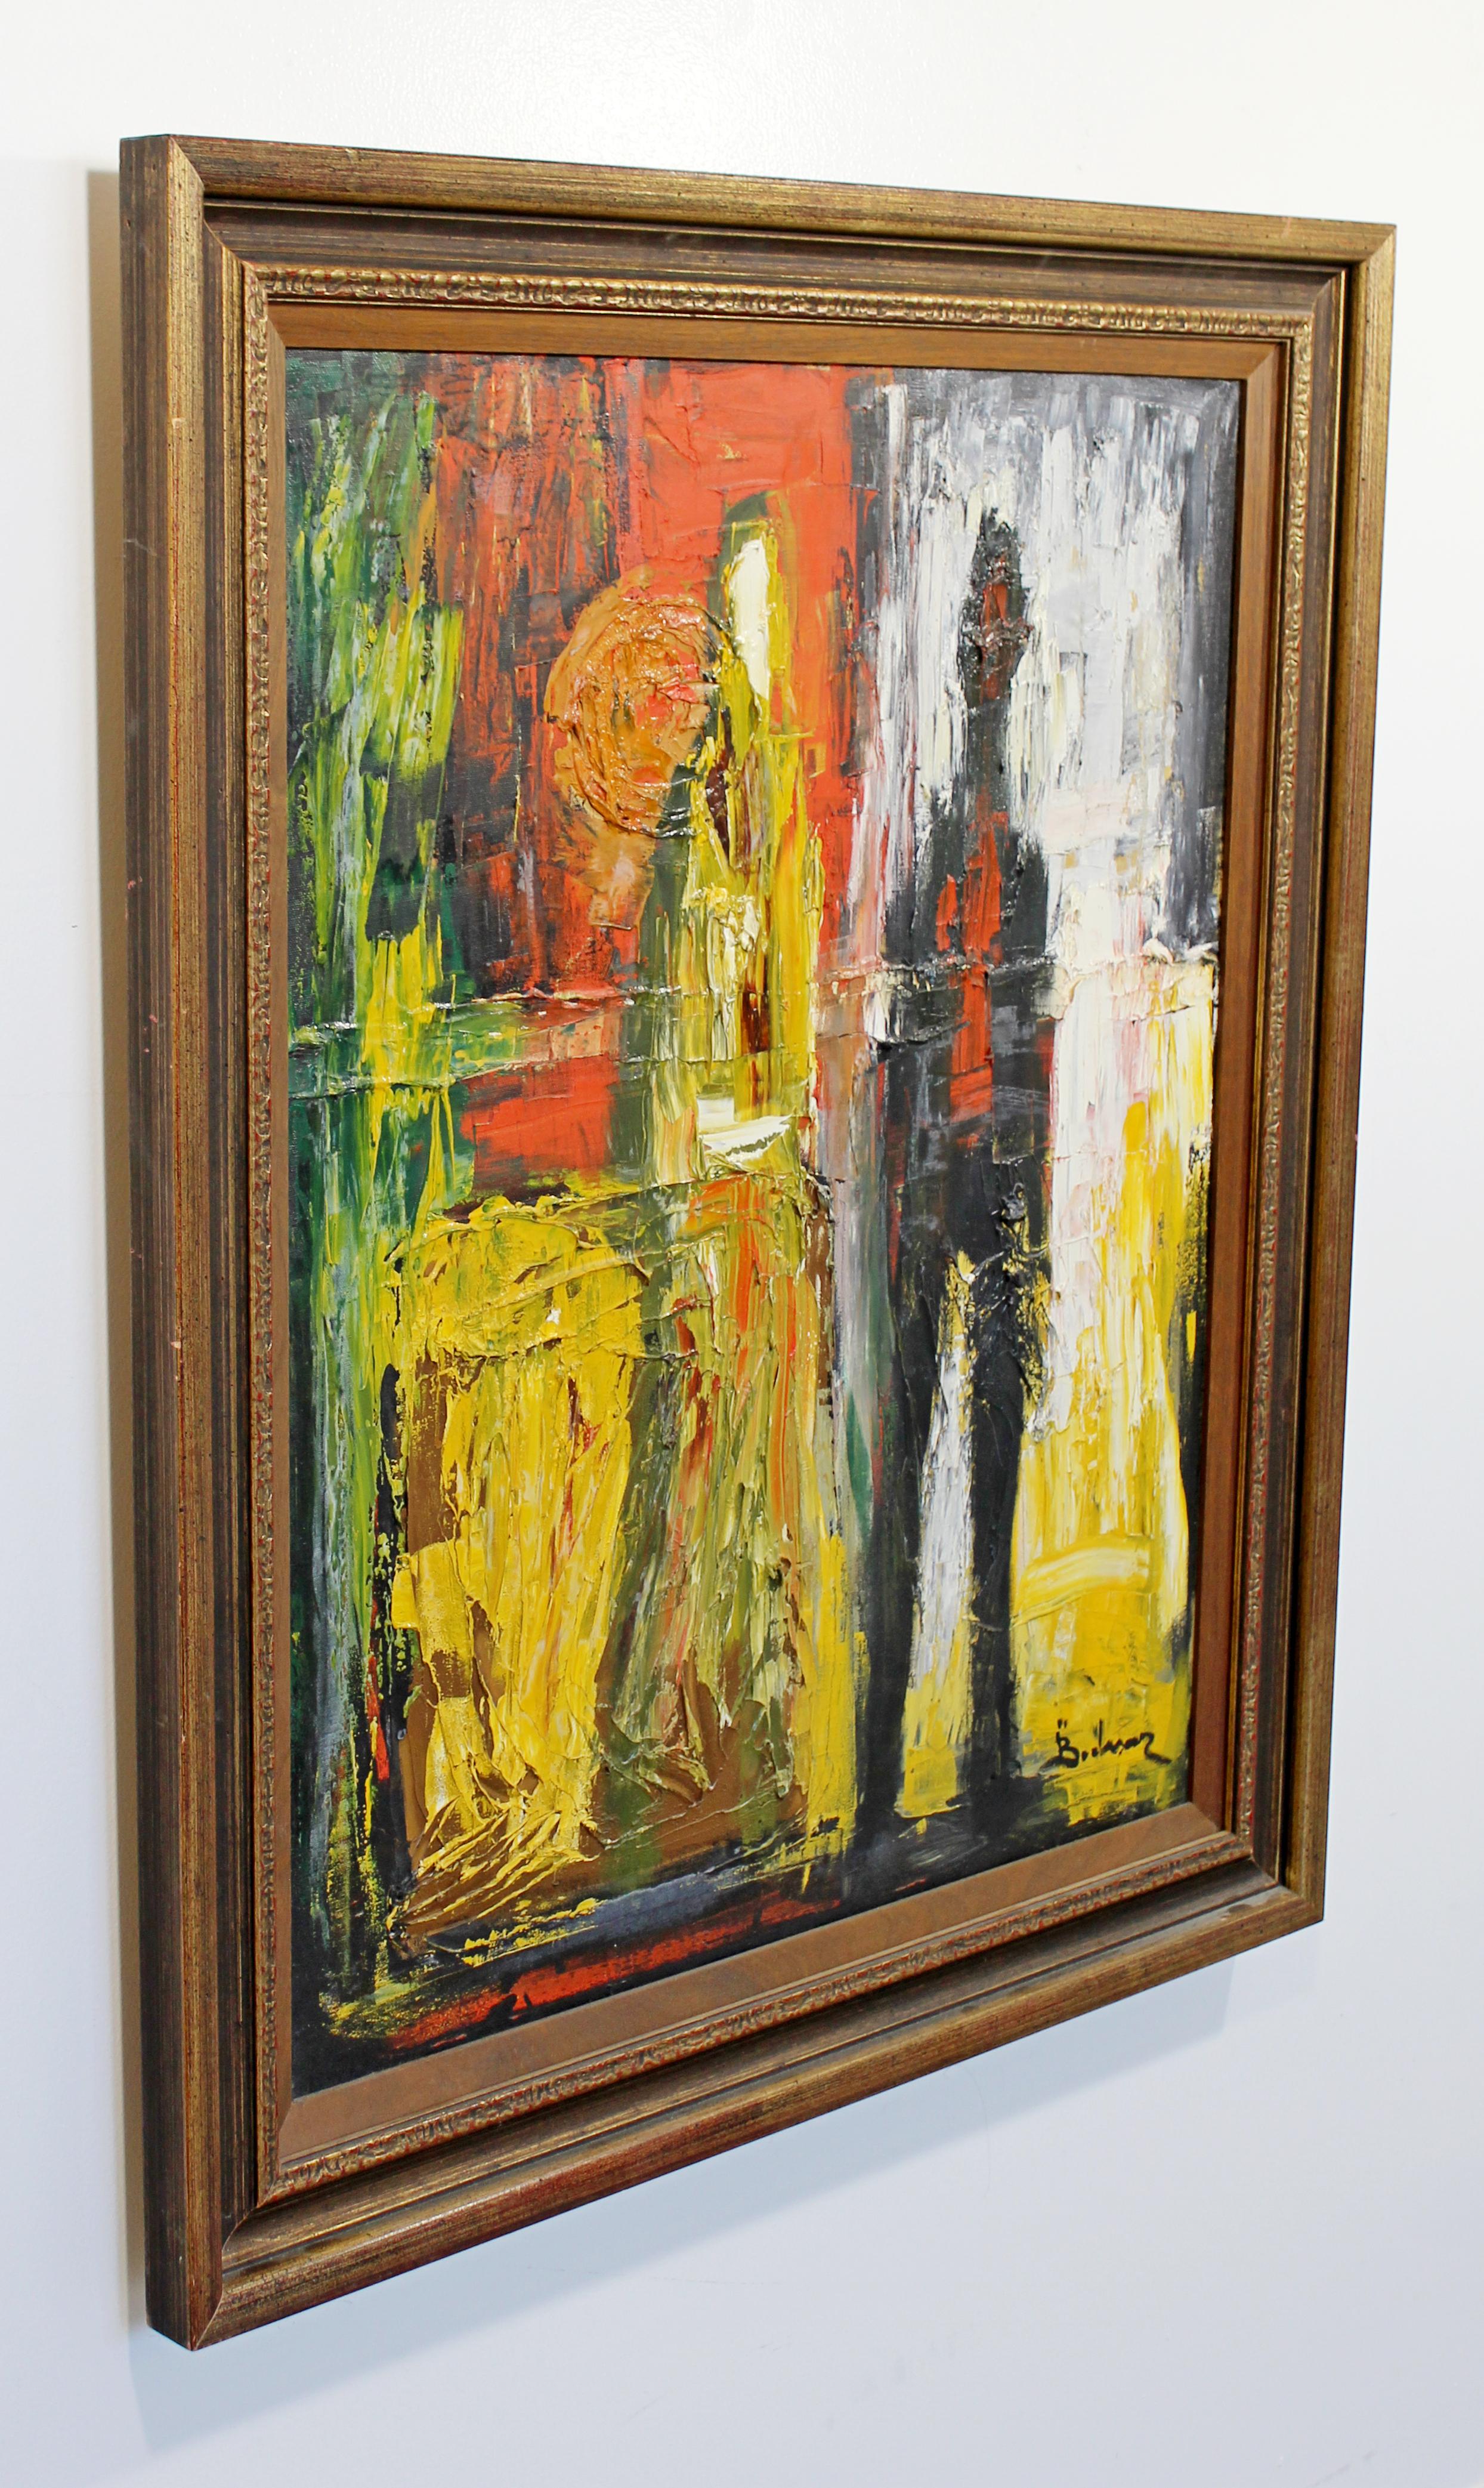 For your consideration is a gorgeous, framed, oil on canvas pallet knife painting of abstracted figures, signed by Bochraz. In excellent condition. The dimensions are 30